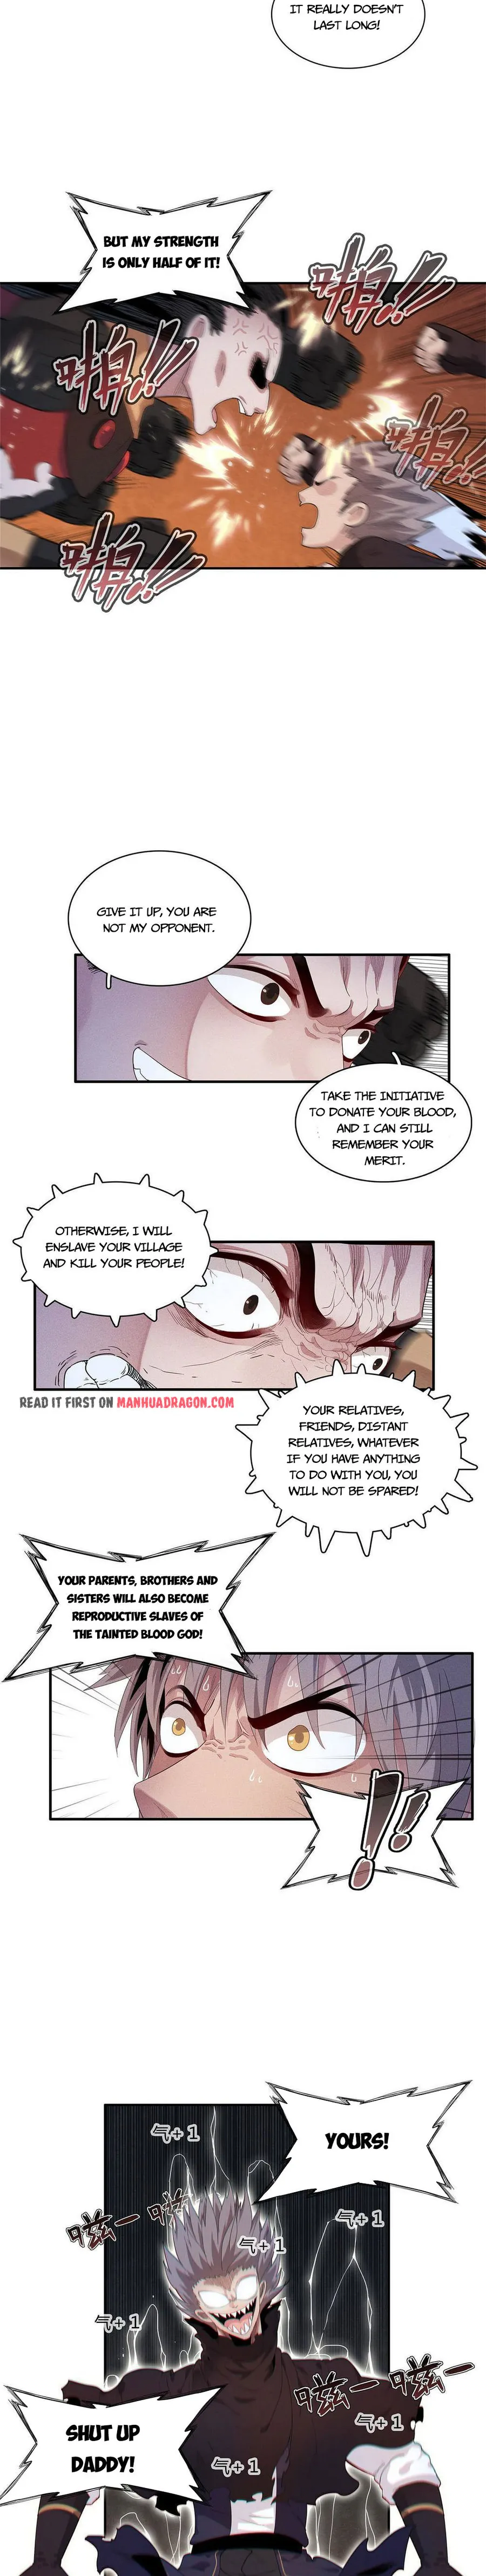 From Now On, I Will Be The Father Of The Mage - Page 3